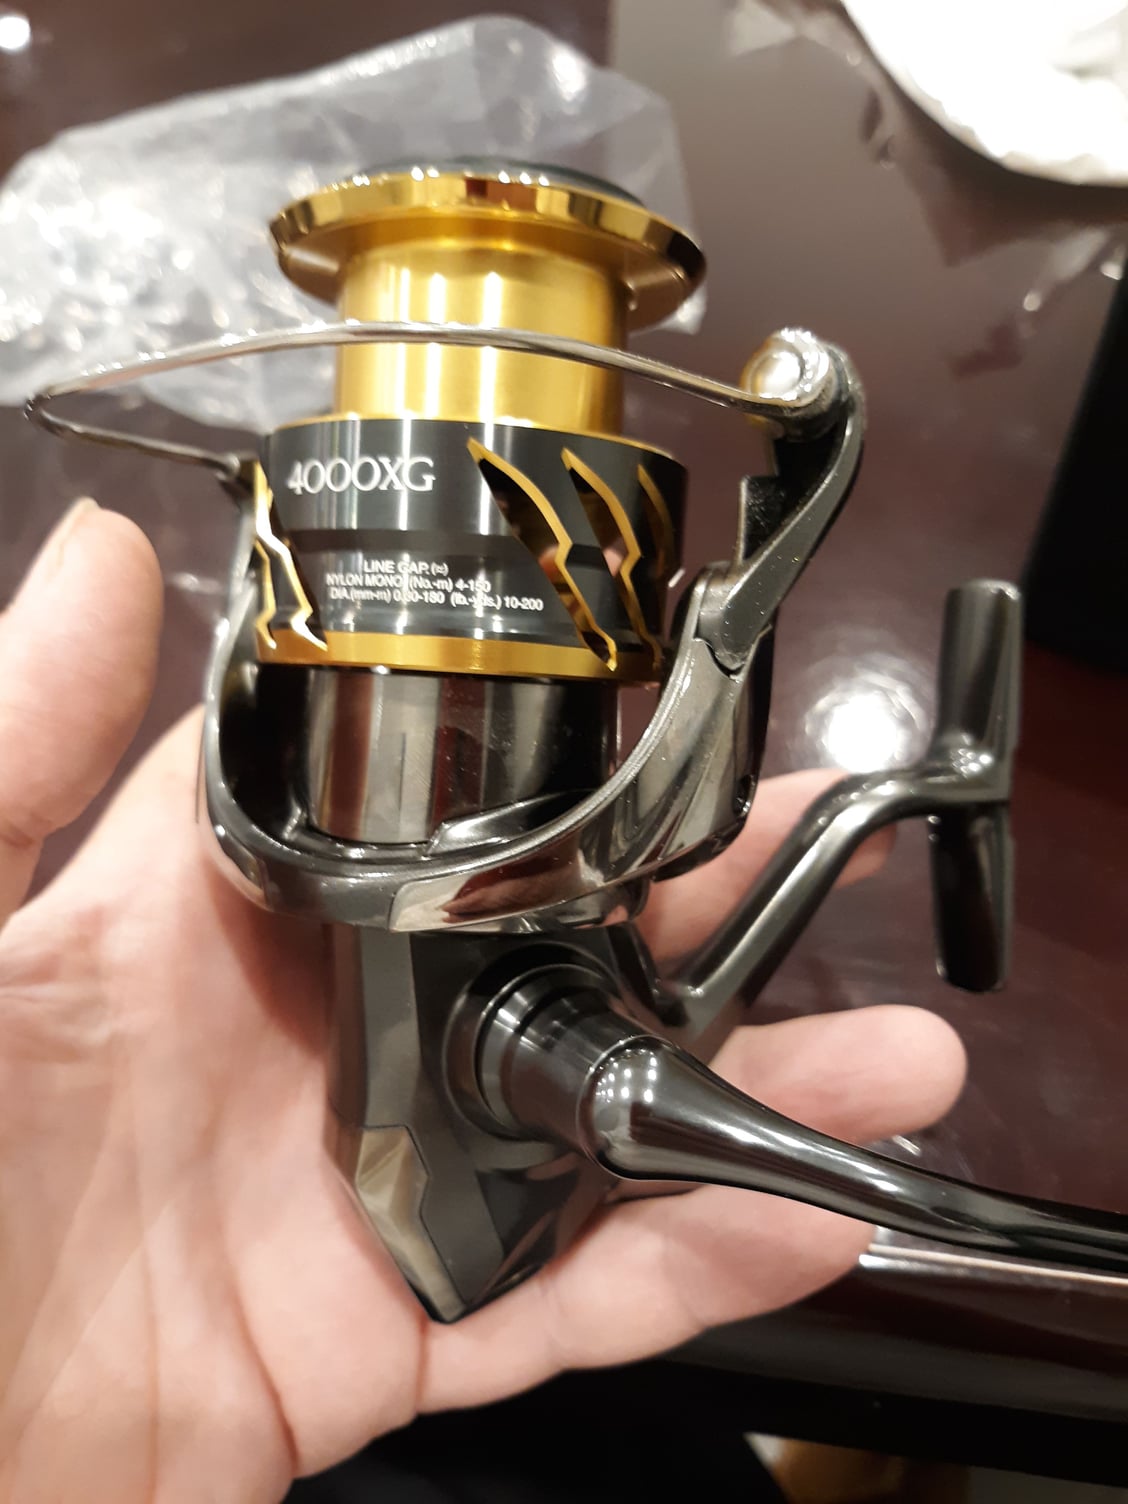 Shimano Twin Power 4000xg for sale - The Hull Truth - Boating and Fishing  Forum